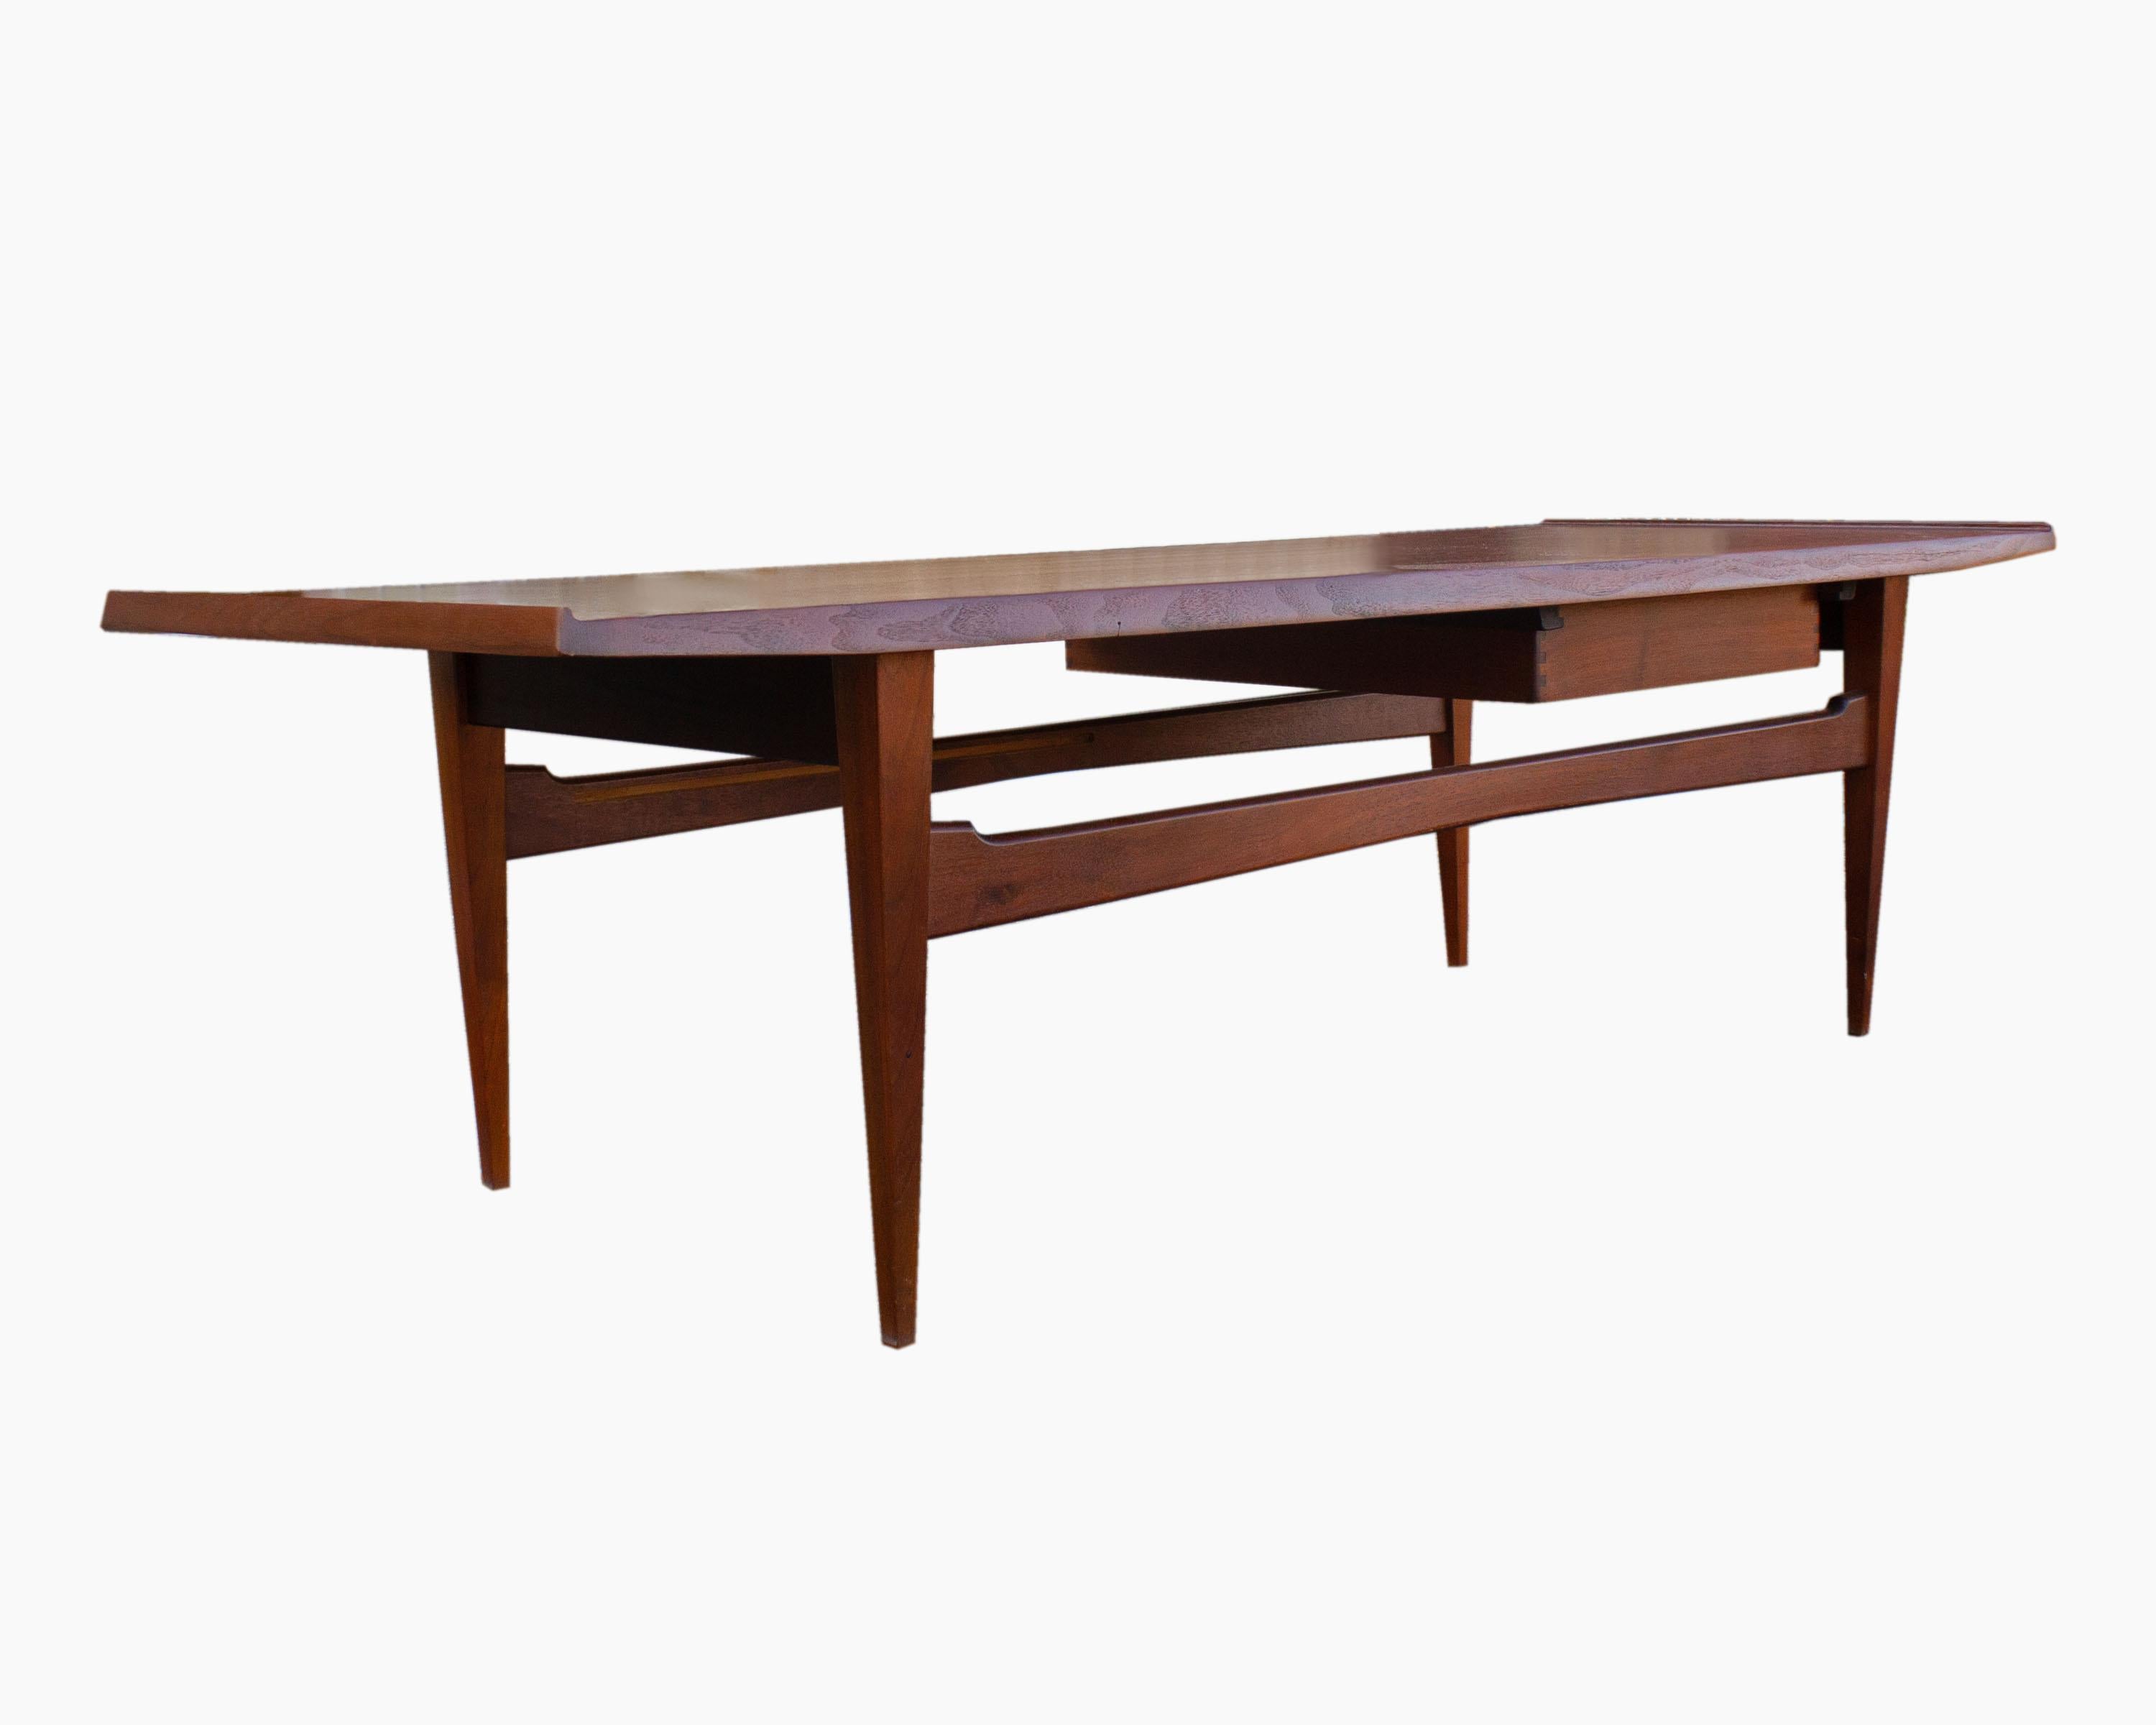 A Mid-Century Modern Danish coffee table manufactured by Moreddi Furniture Co. Composed of walnut and made in Denmark, the elongated table features a rectangular shape. Angled, slightly flared ends add visual interest to the sleek table top. Having